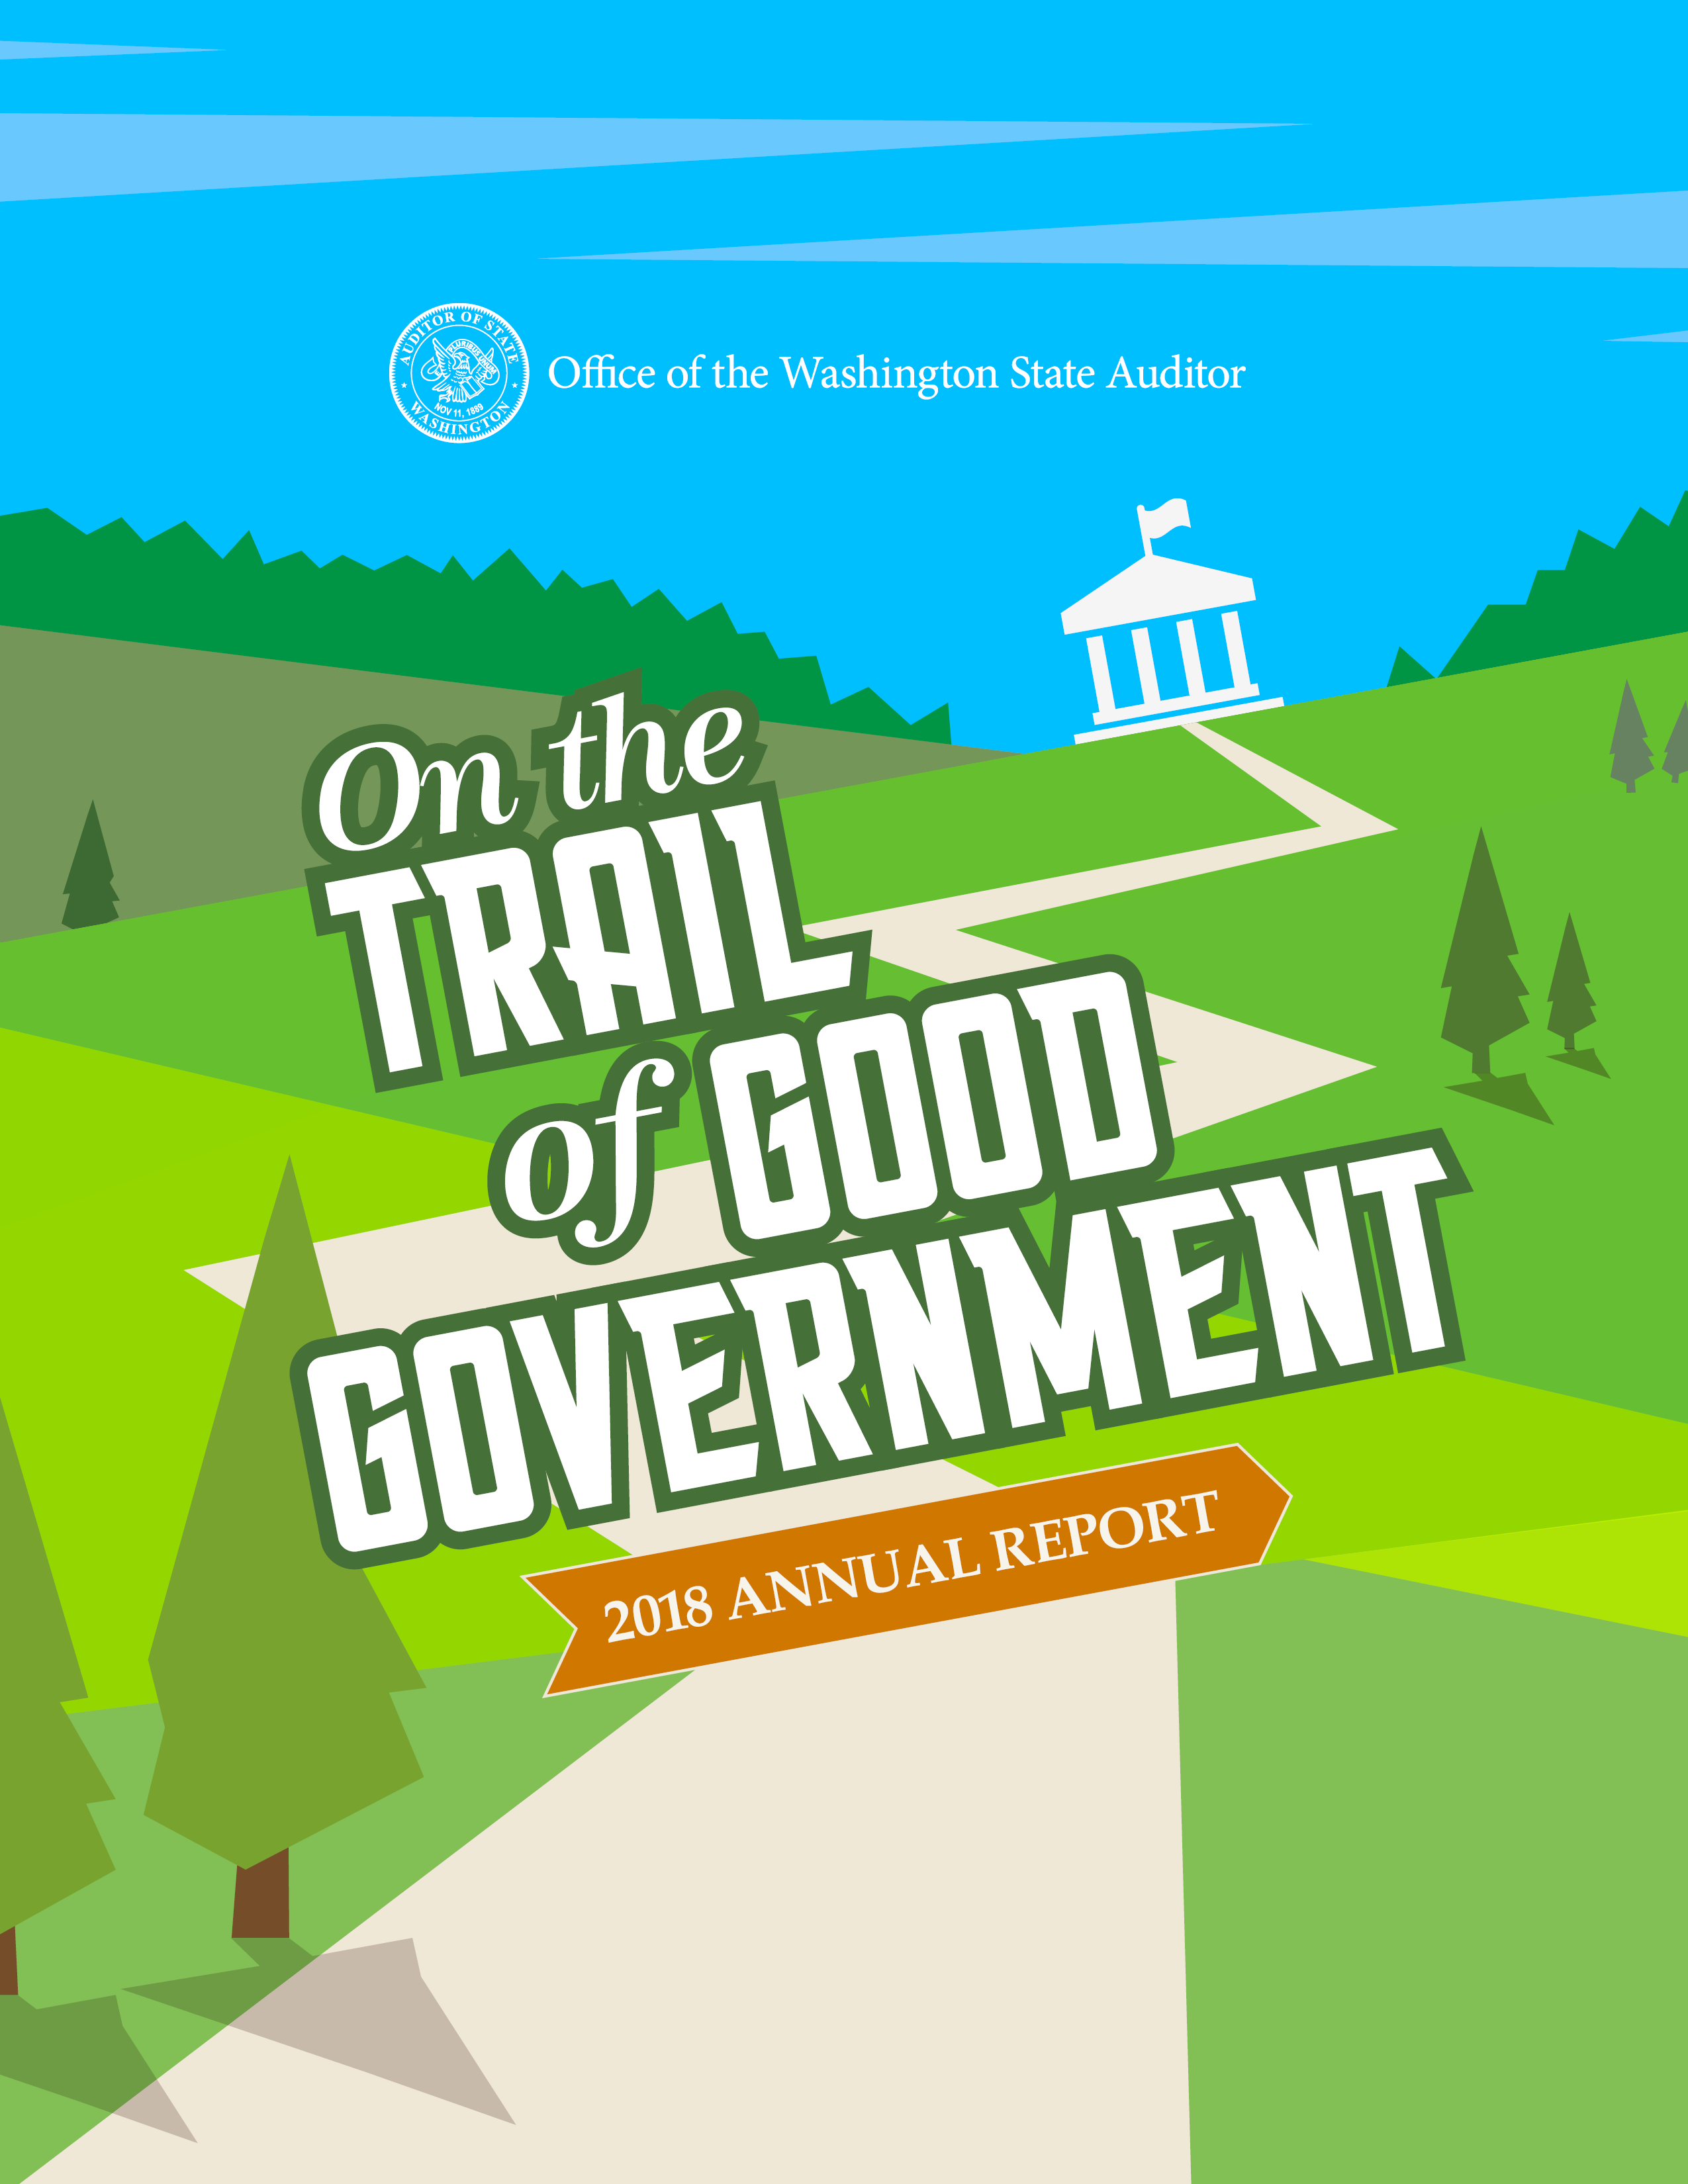 Cover of 2018 Annual Report shows a trail leading to a government building.